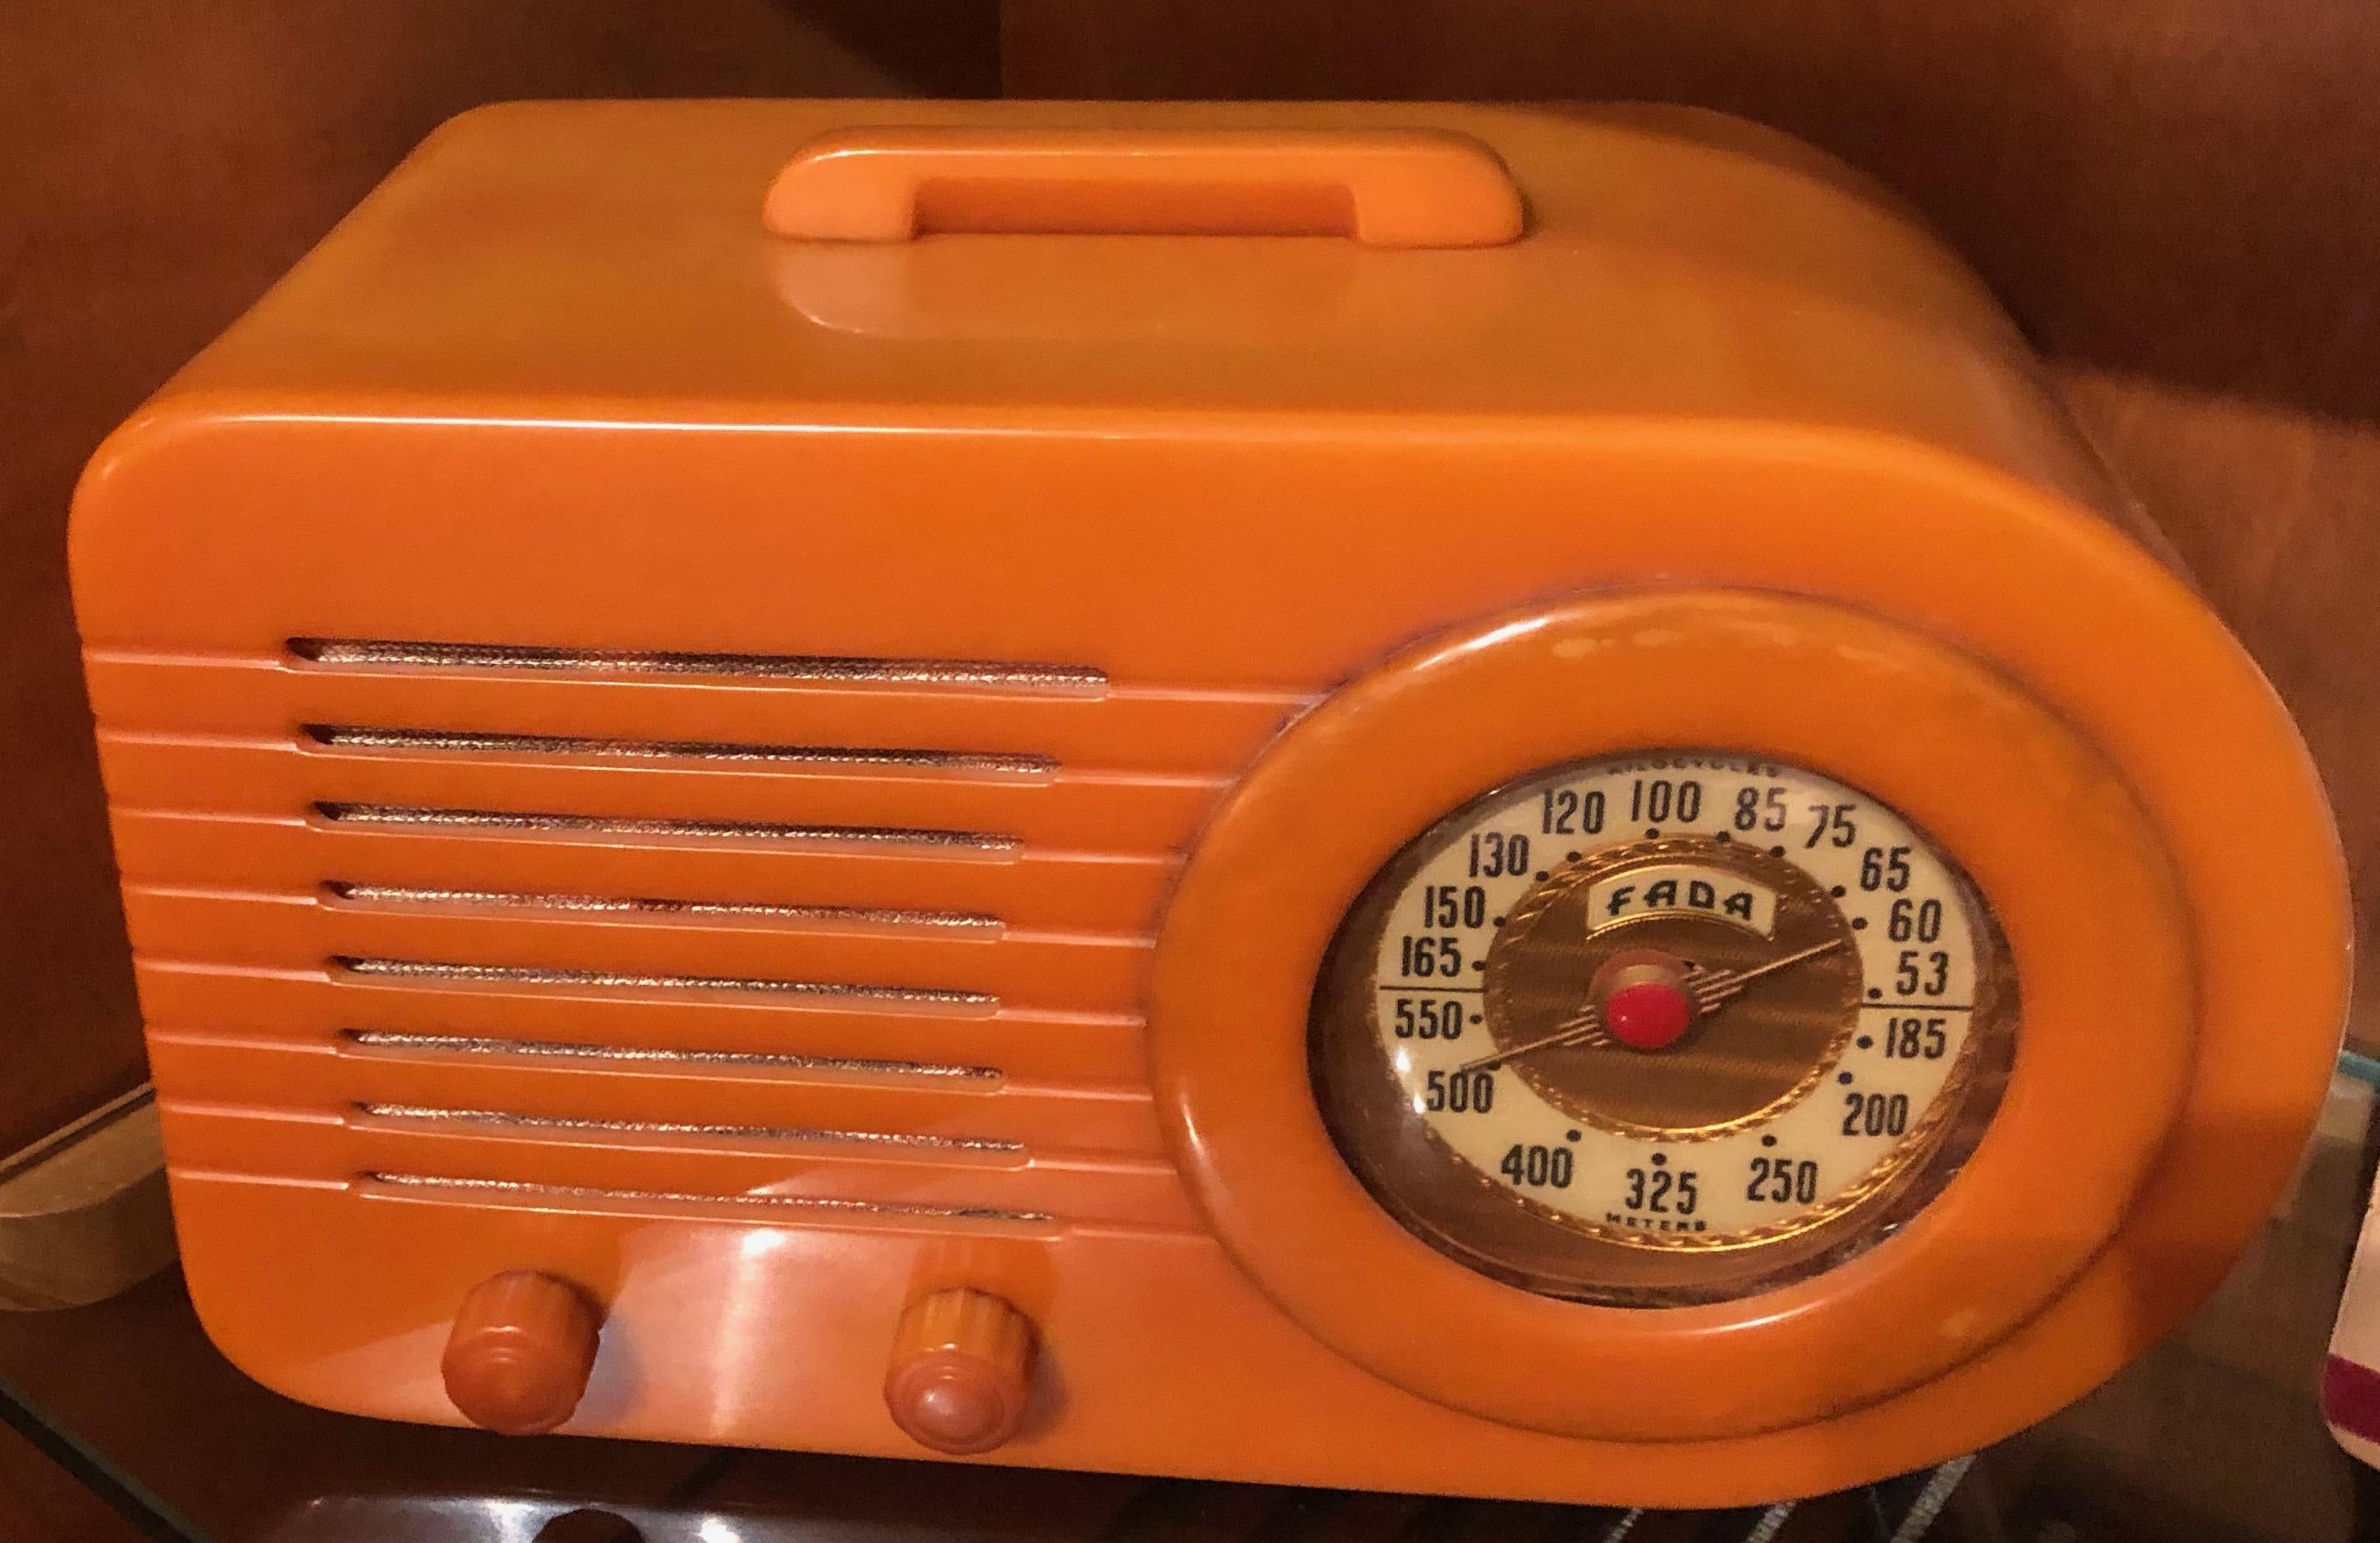 The famous Fada bullet Art Deco Radio in butterscotch Catalin is in excellent original condition. There are no defects in the body, no chips, cracks, or repairs. The chassis has been gone through quite thoroughly and anything requiring service has